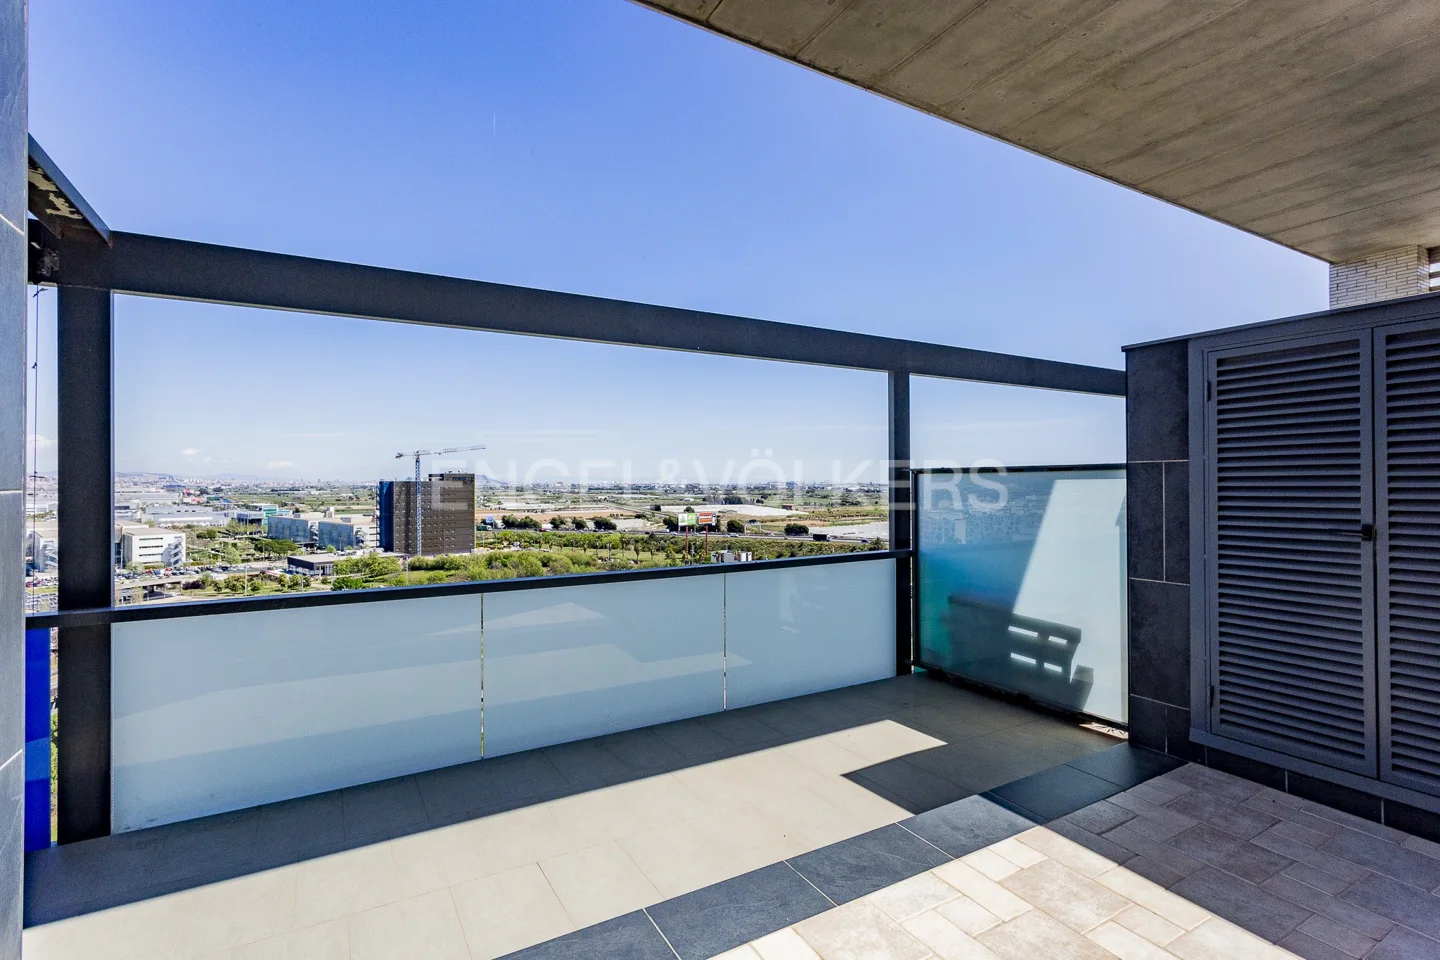 Spectacular Duplex Penthouse, touching the sky and overlooking the city!